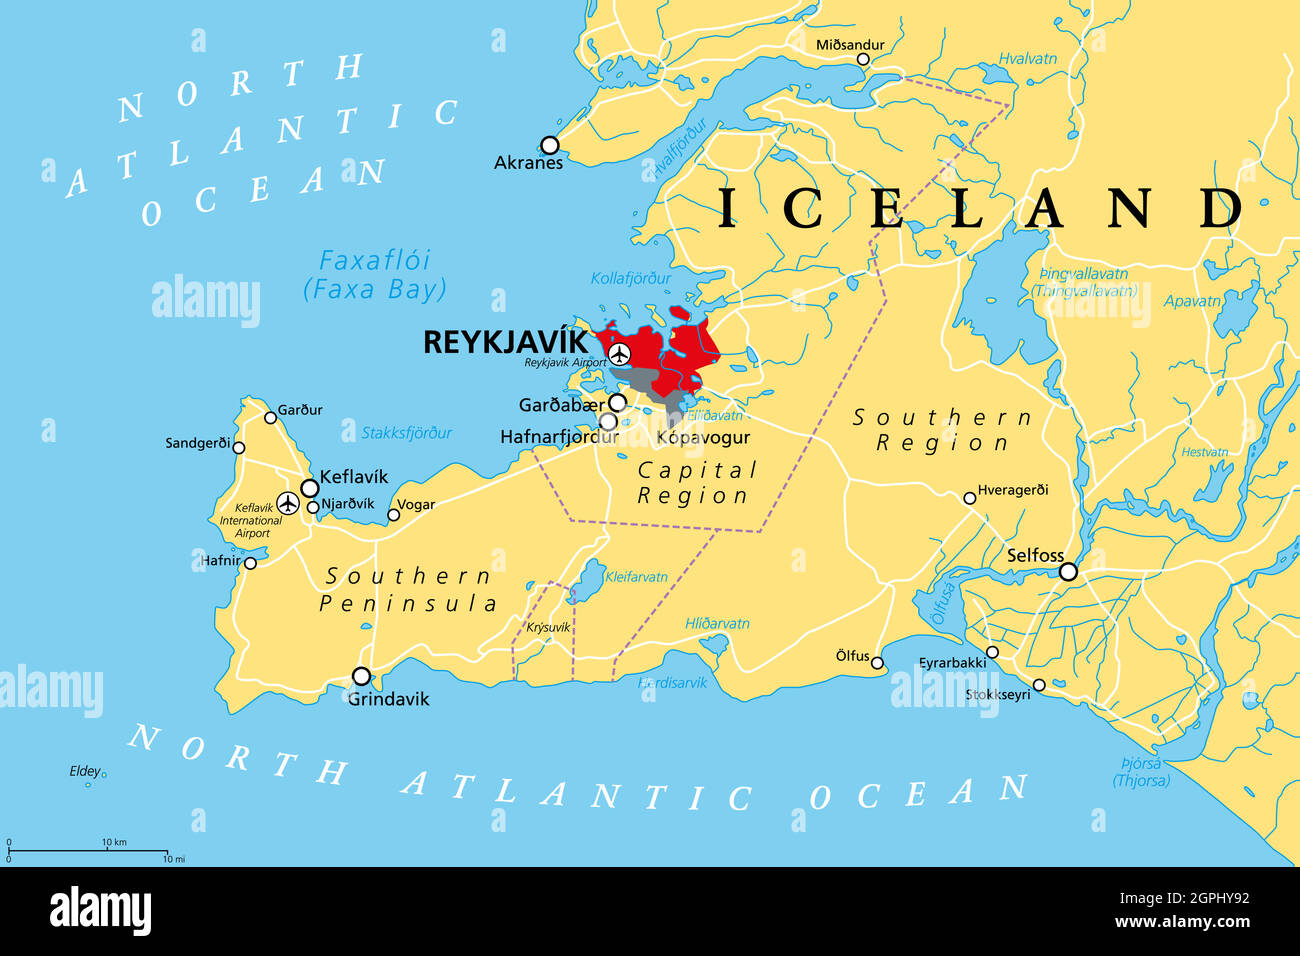 Iceland, Reykjavik, Capital Region and Southern Peninsula, political map Stock Vector